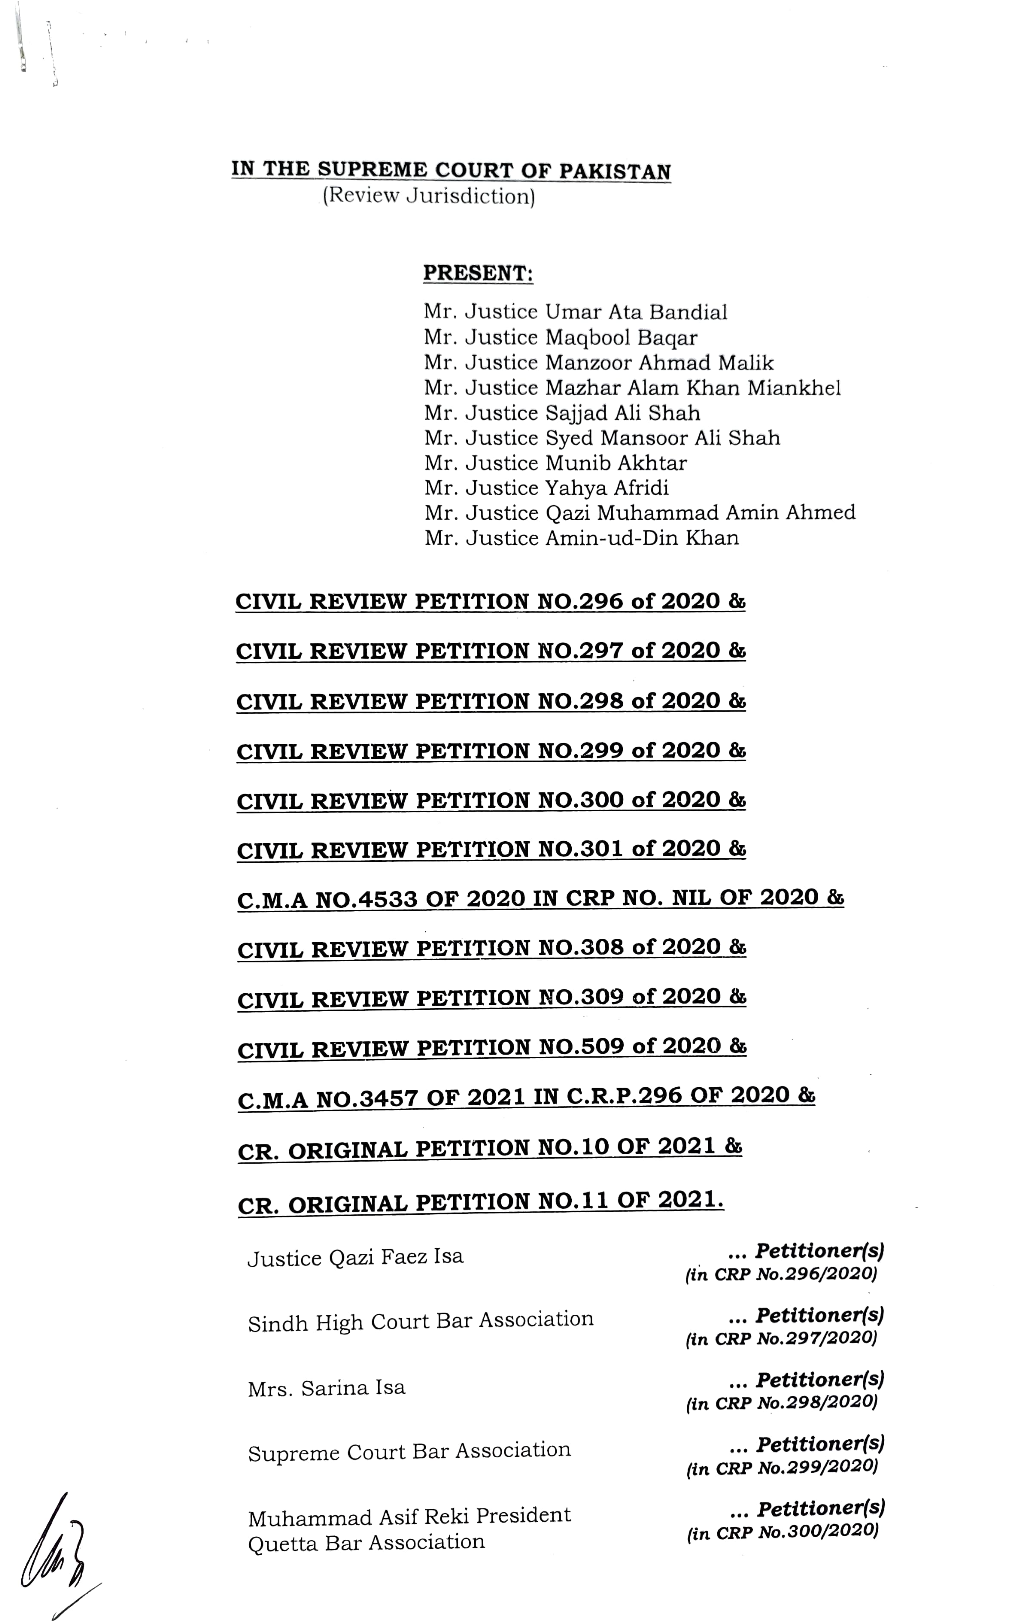 CIVIL Review PETITION NO.301 of 2020 D& CMA NO.4533 of 2020 IN